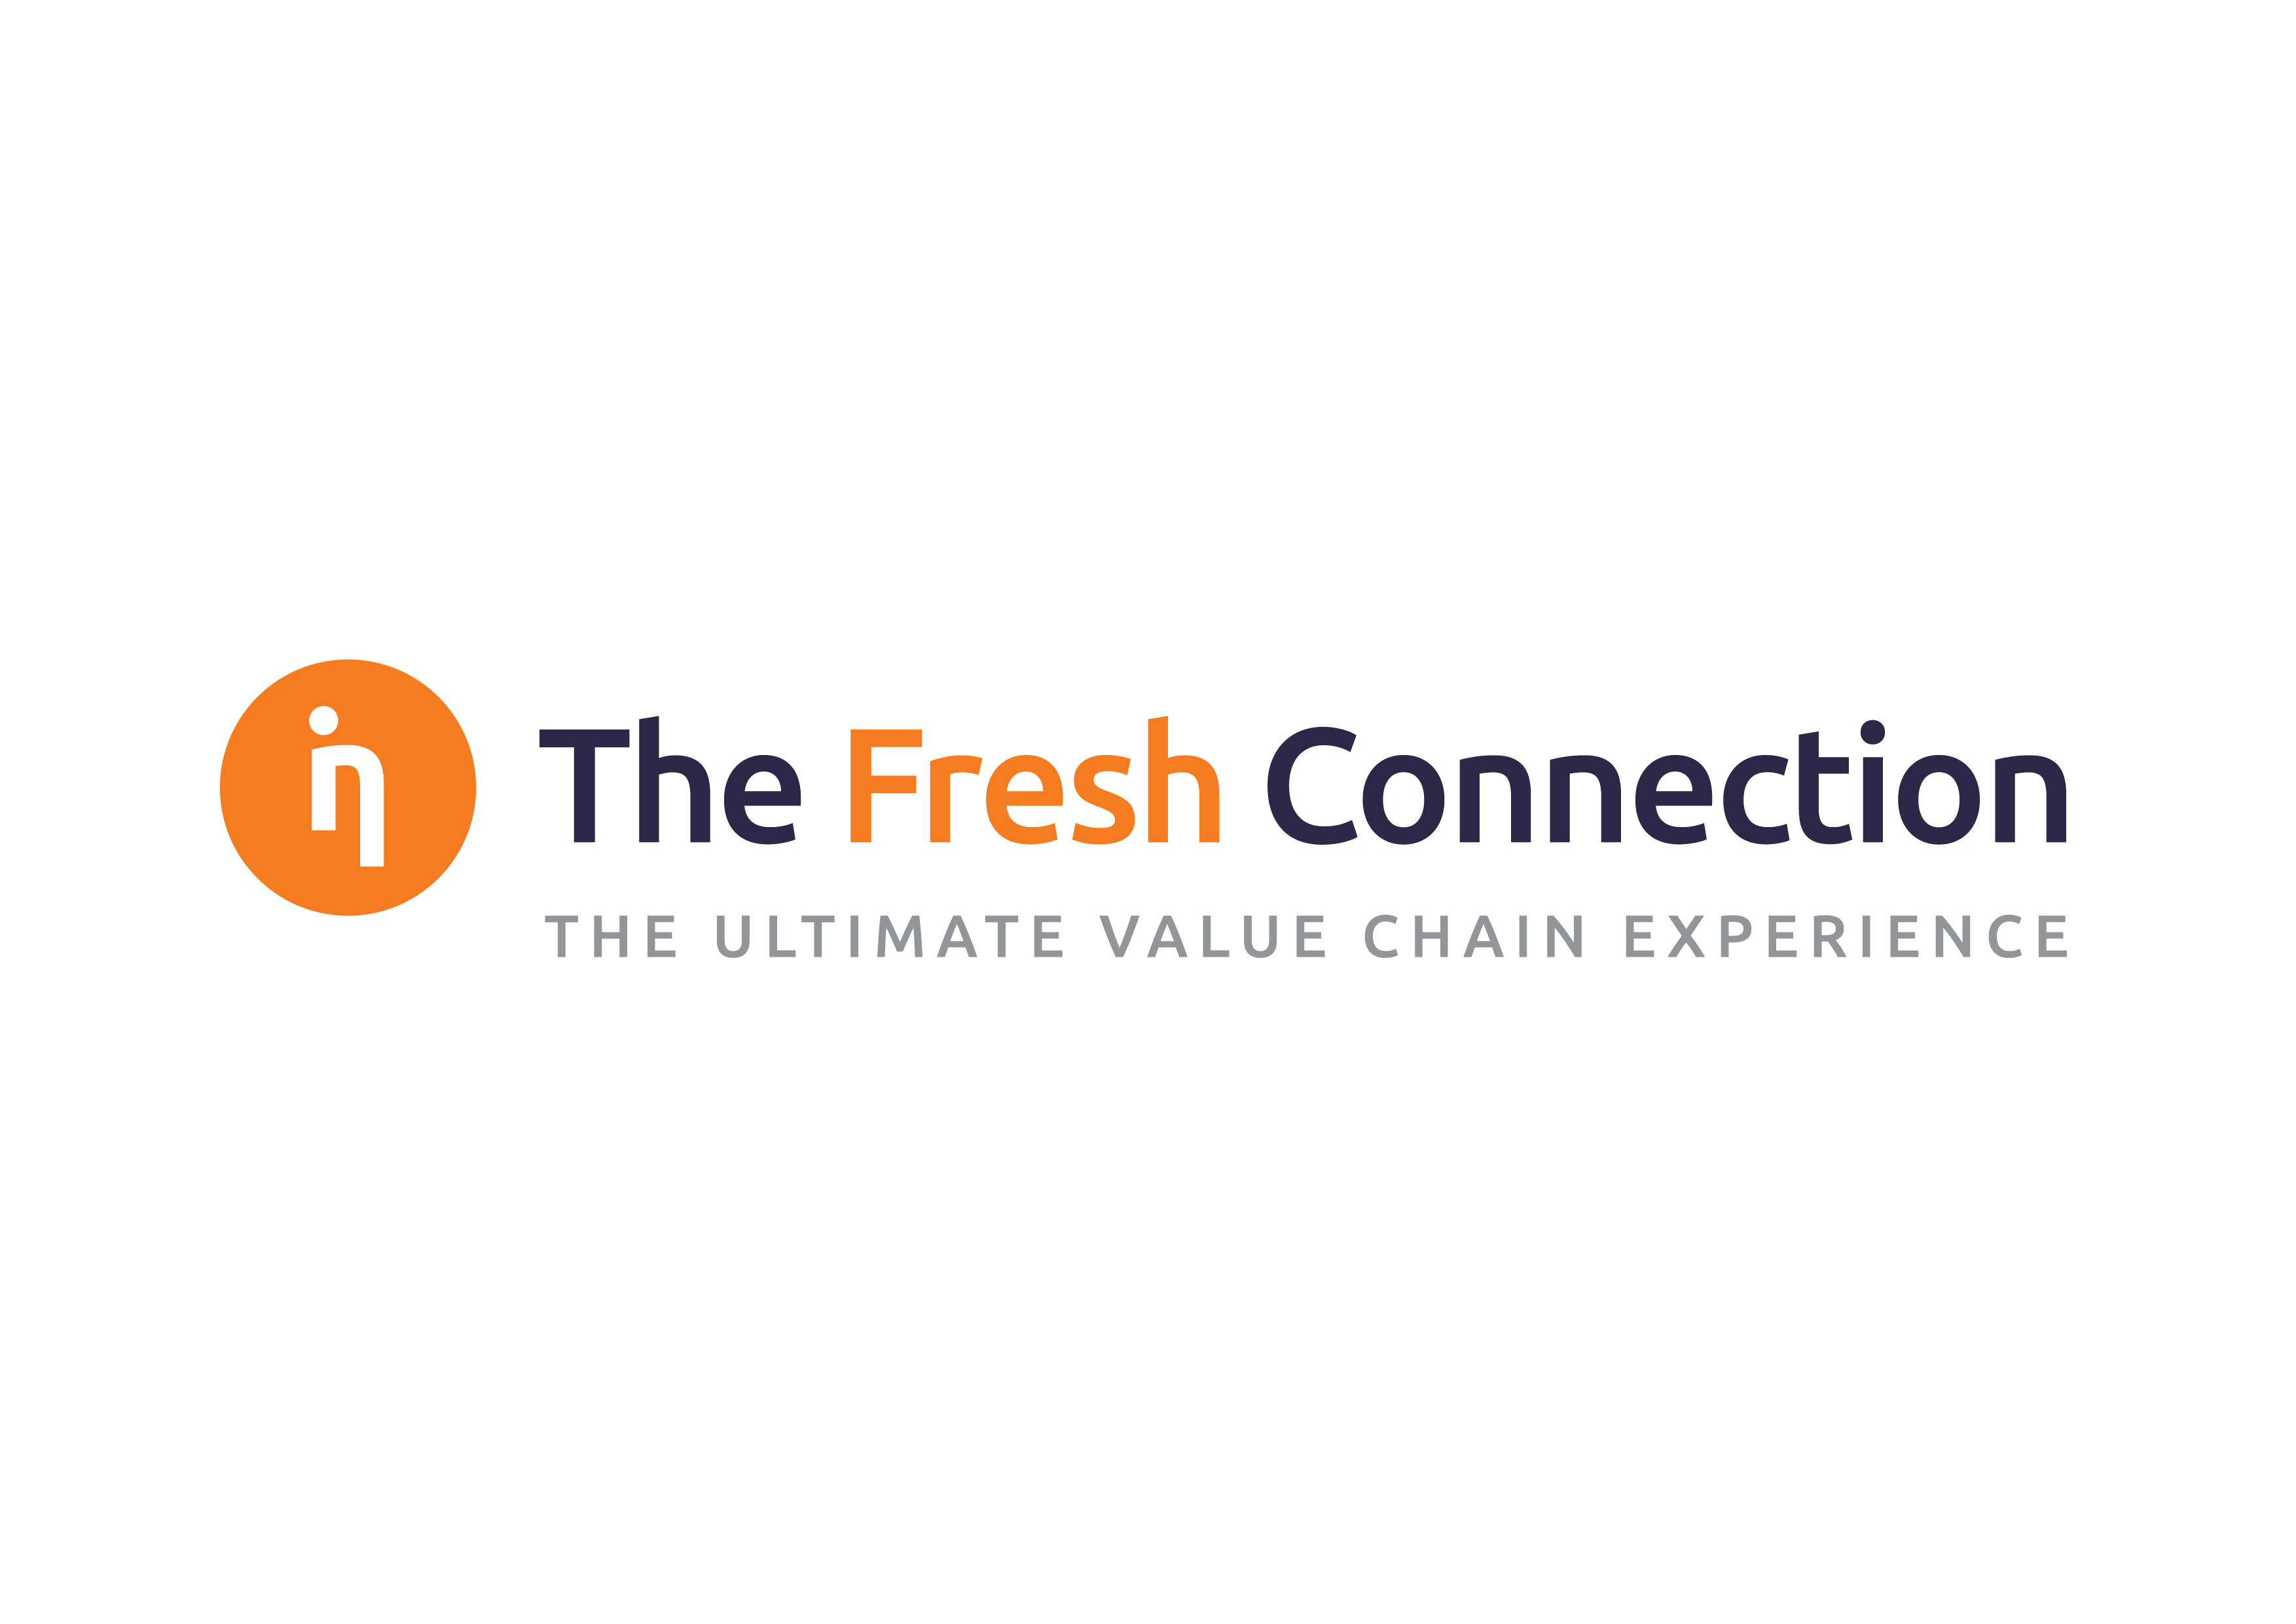 The Fresh Connection